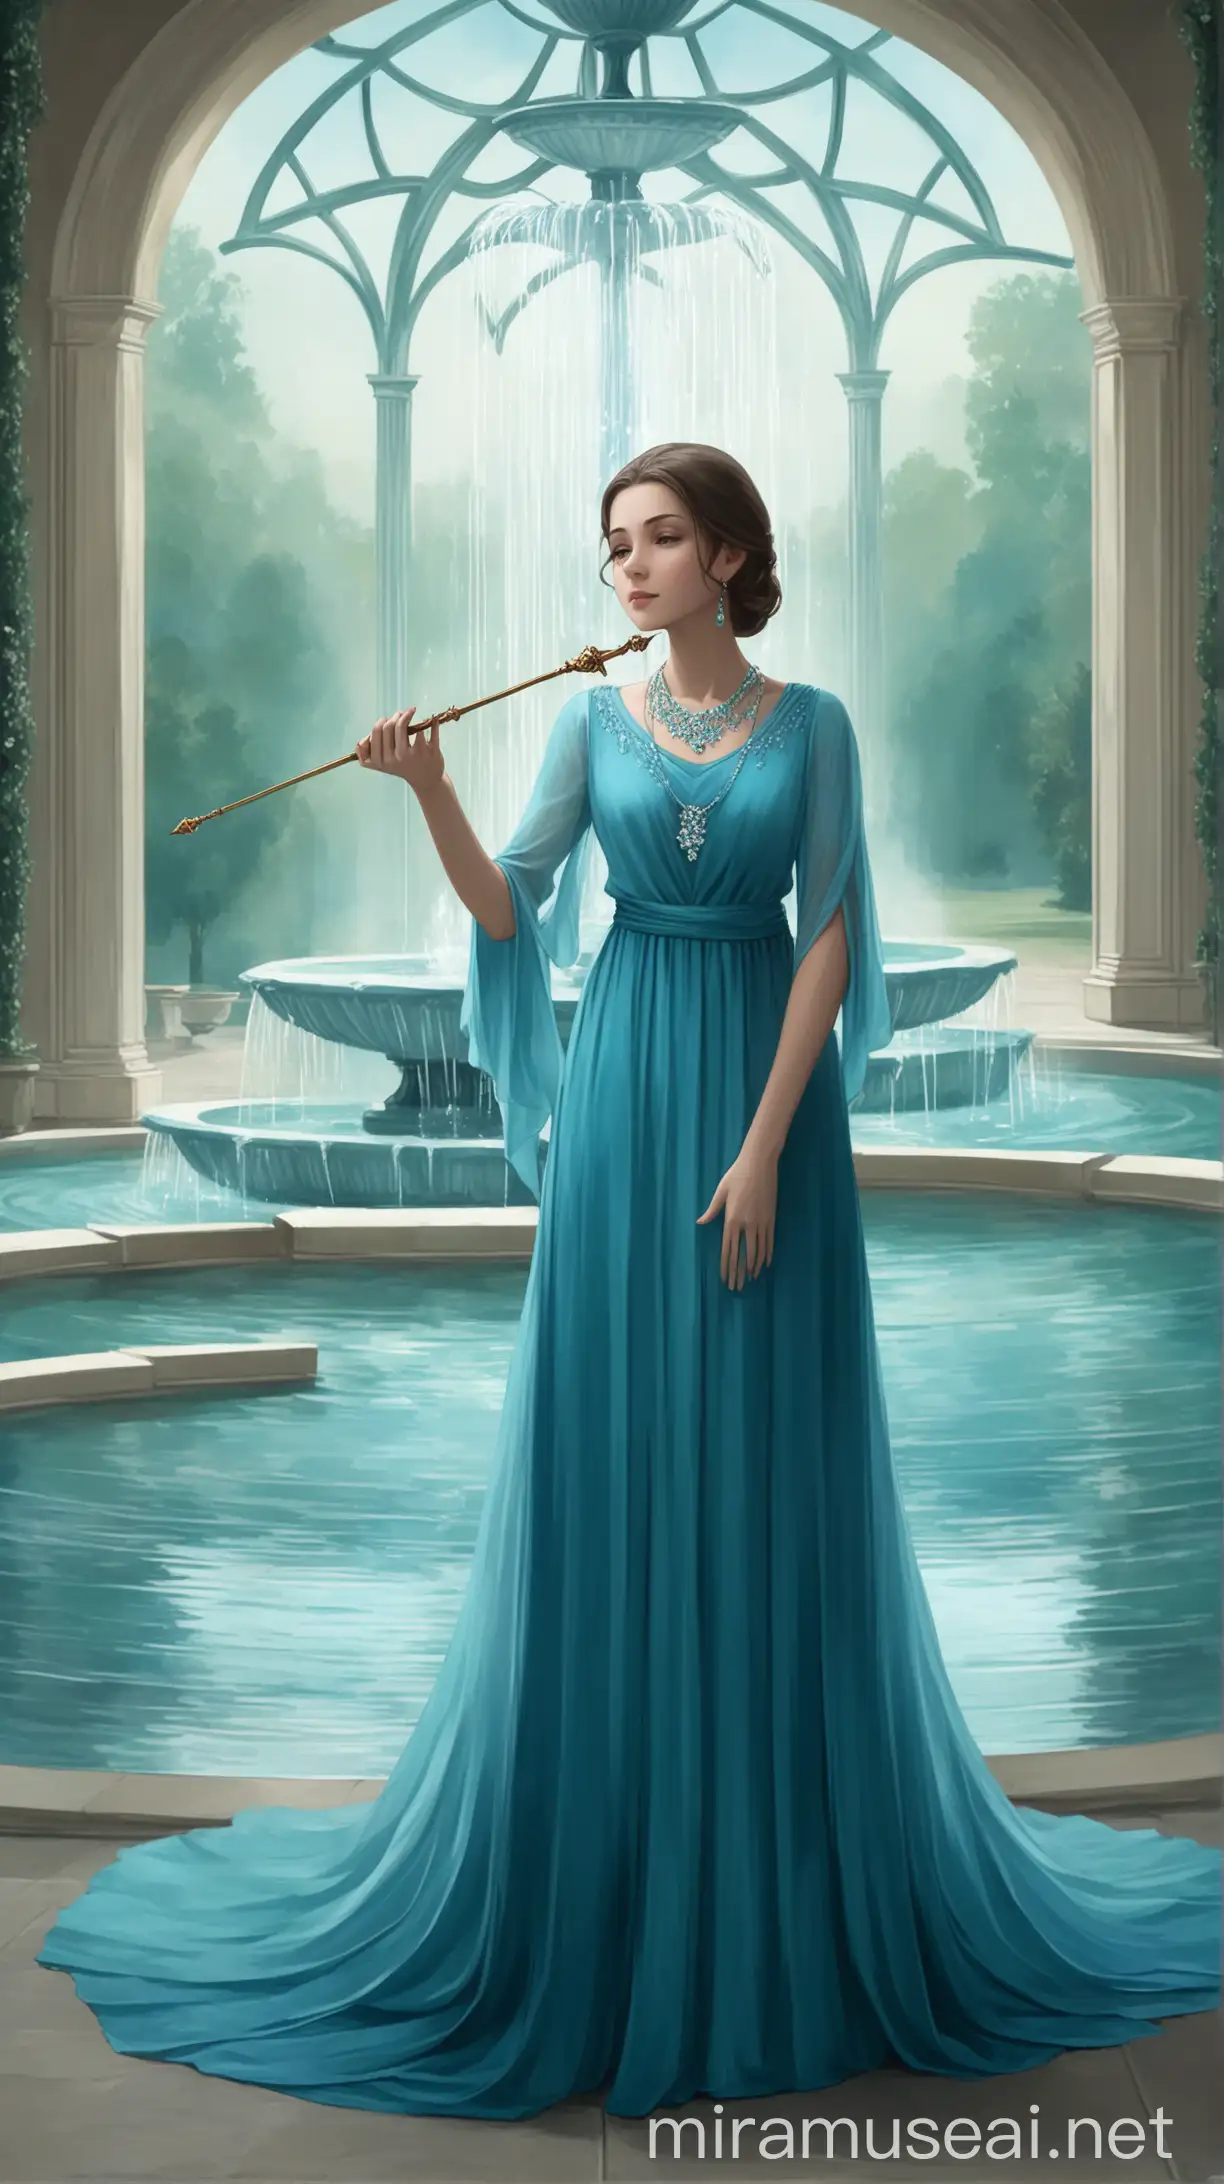 In this image, we see a young woman standing elegantly in a blue dress, holding a wand in her hand. She is standing in front of a beautiful fountain, with a window and a canopy in the background. The woman is wearing a necklace that complements her attire. Her expression is calm and graceful. The colors in the image are primarily shades of blue and teal, creating a serene and enchanting atmosphere. The woman appears to be in her early twenties and exudes a sense of poise and elegance. The overall scene gives off an artistic and ethereal vibe.